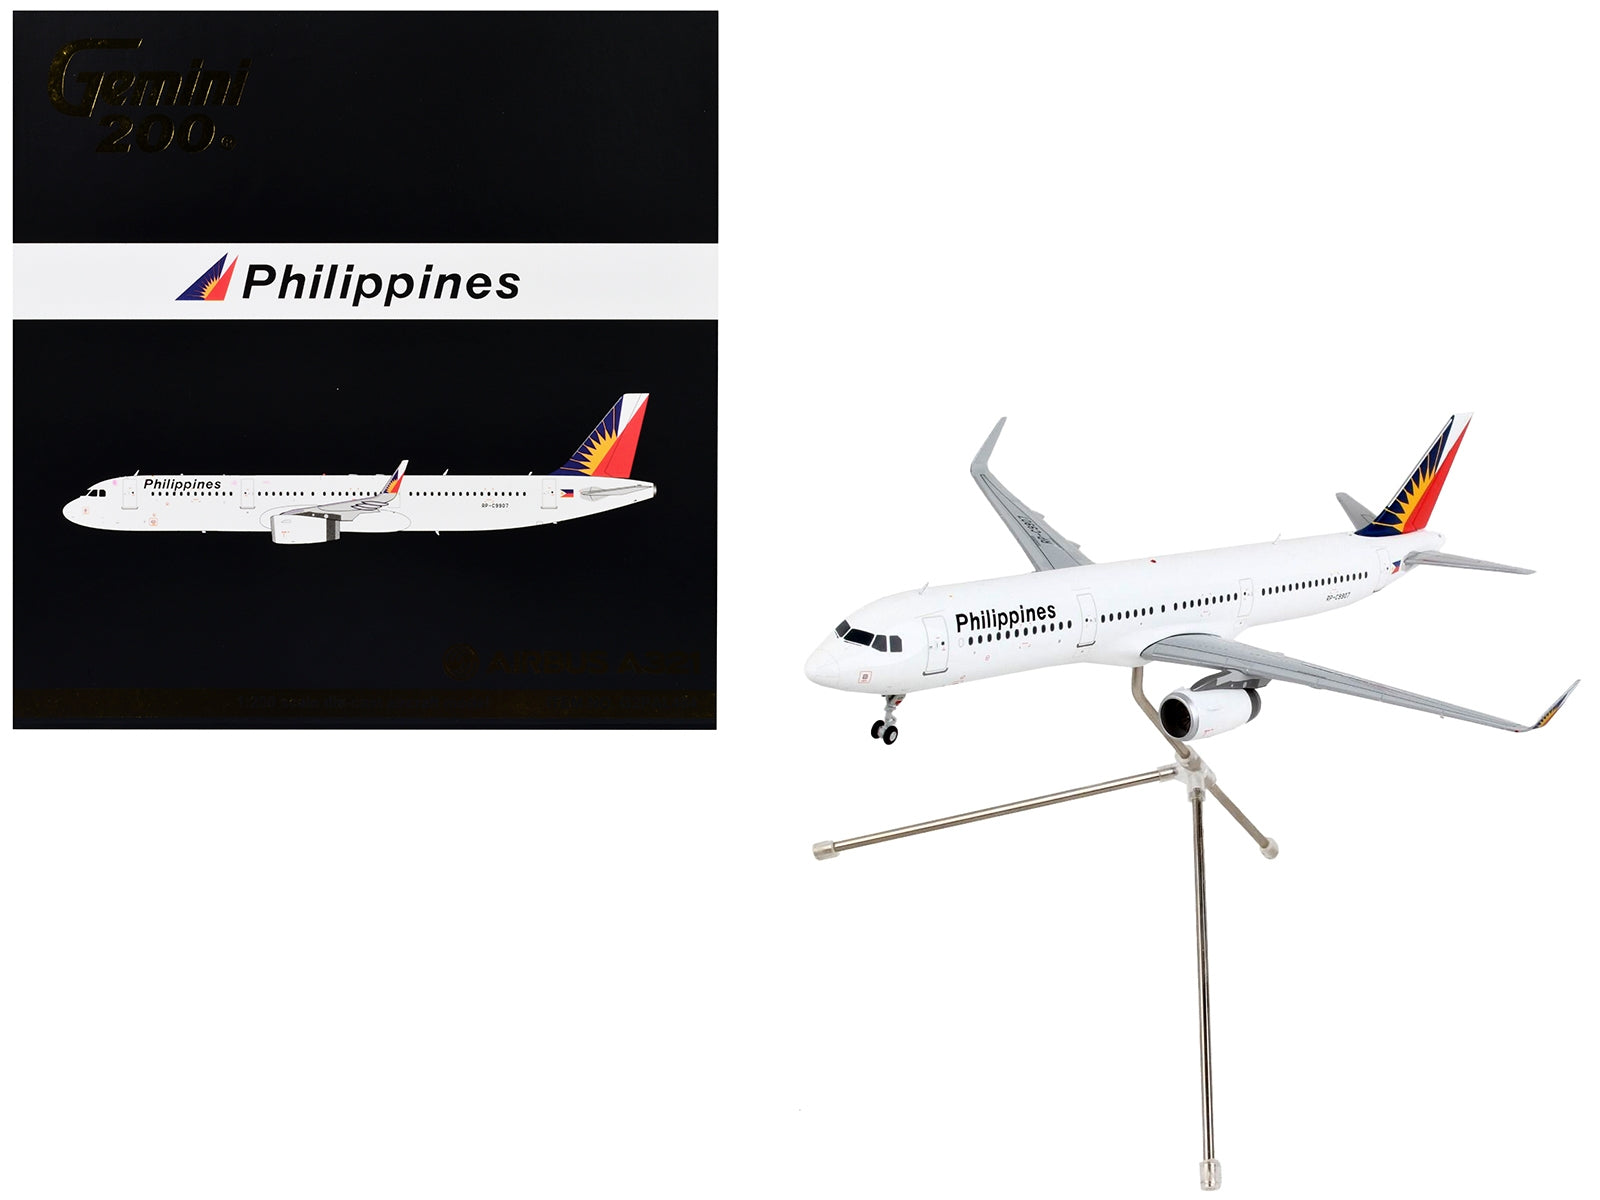 Airbus A321 Commercial Aircraft "Philippine Airlines" White with Tail Graphics "Gemini 200" Series 1/200 Diecast Model Airplane by GeminiJets